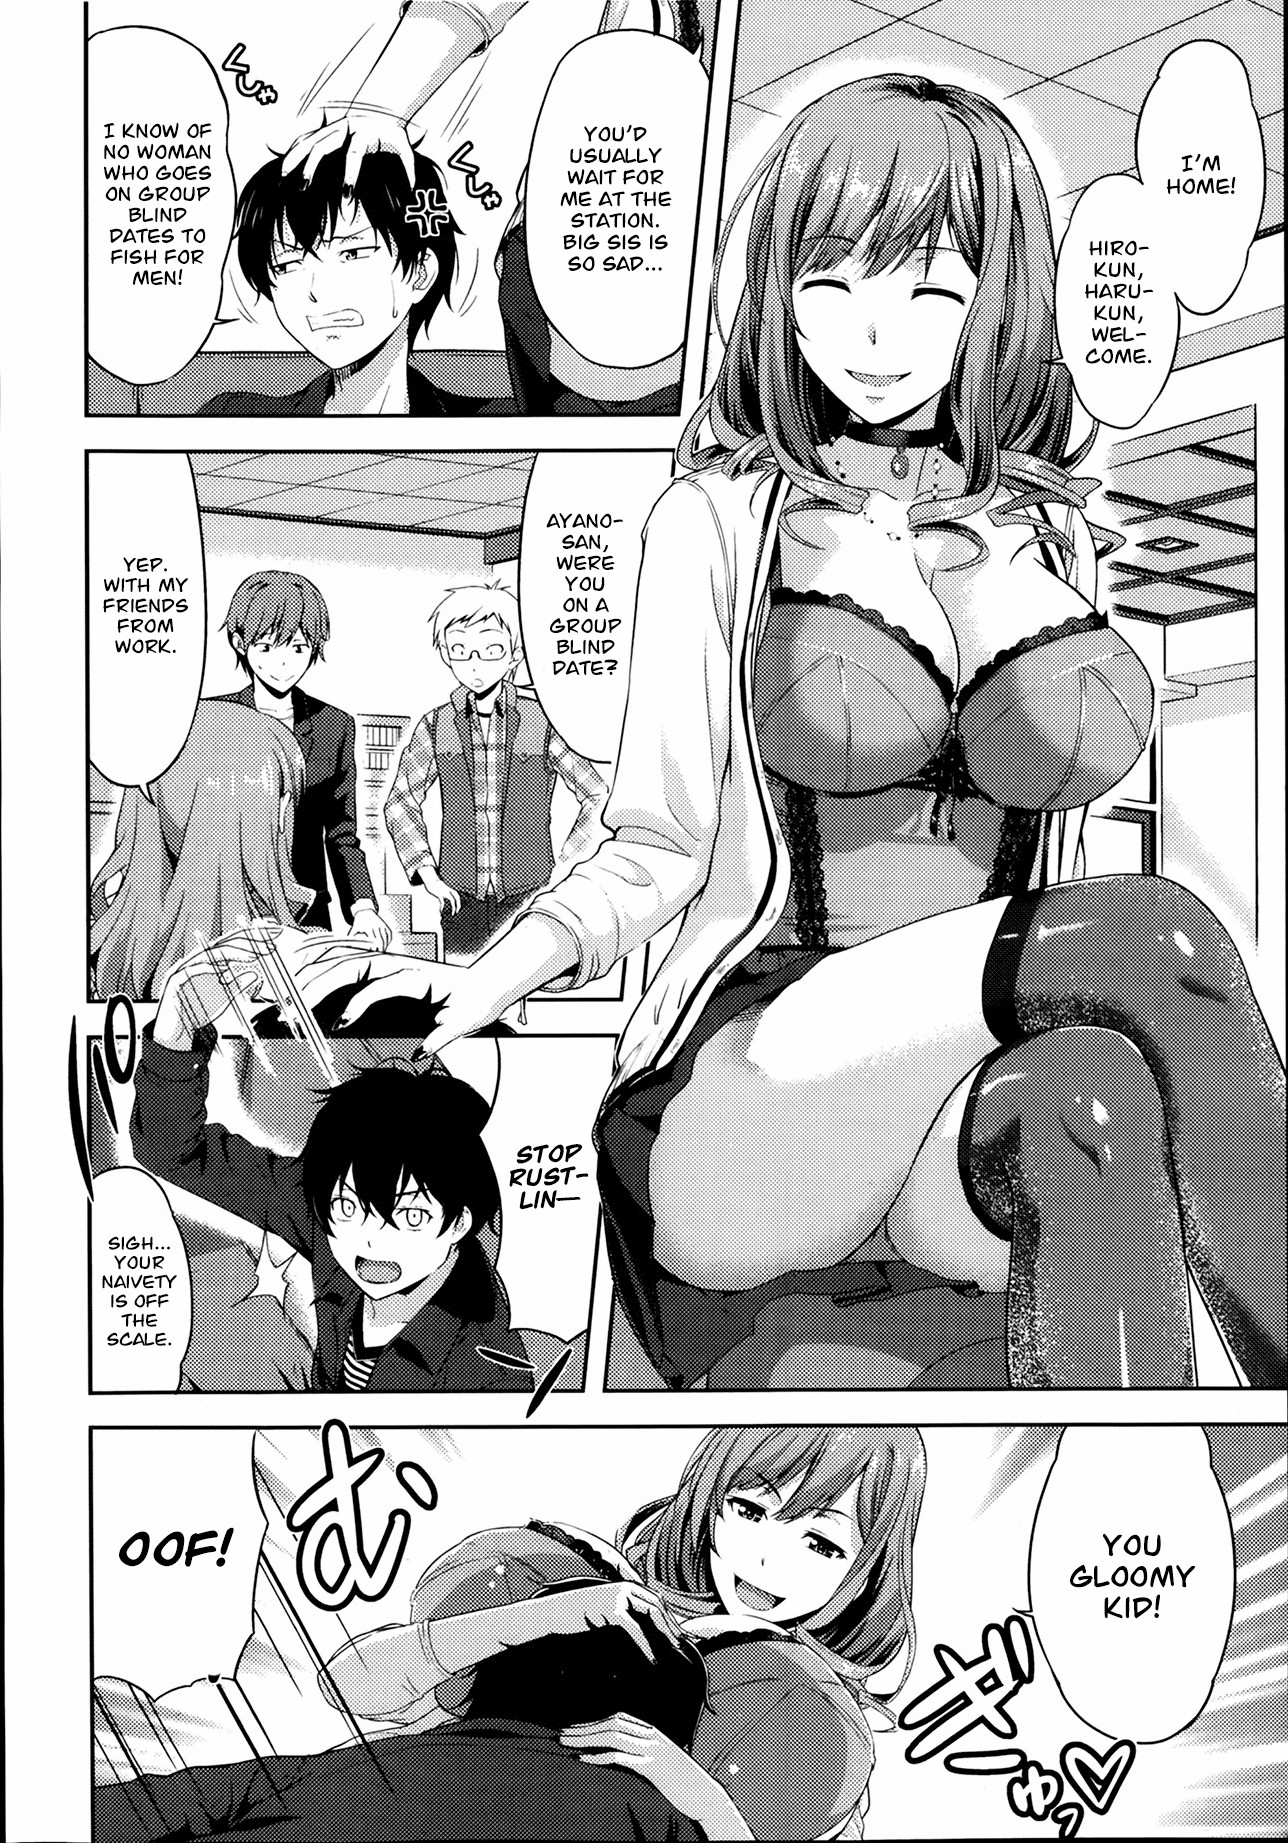 Busty anime slut gets gangbanged at party - busty sex comics image pic